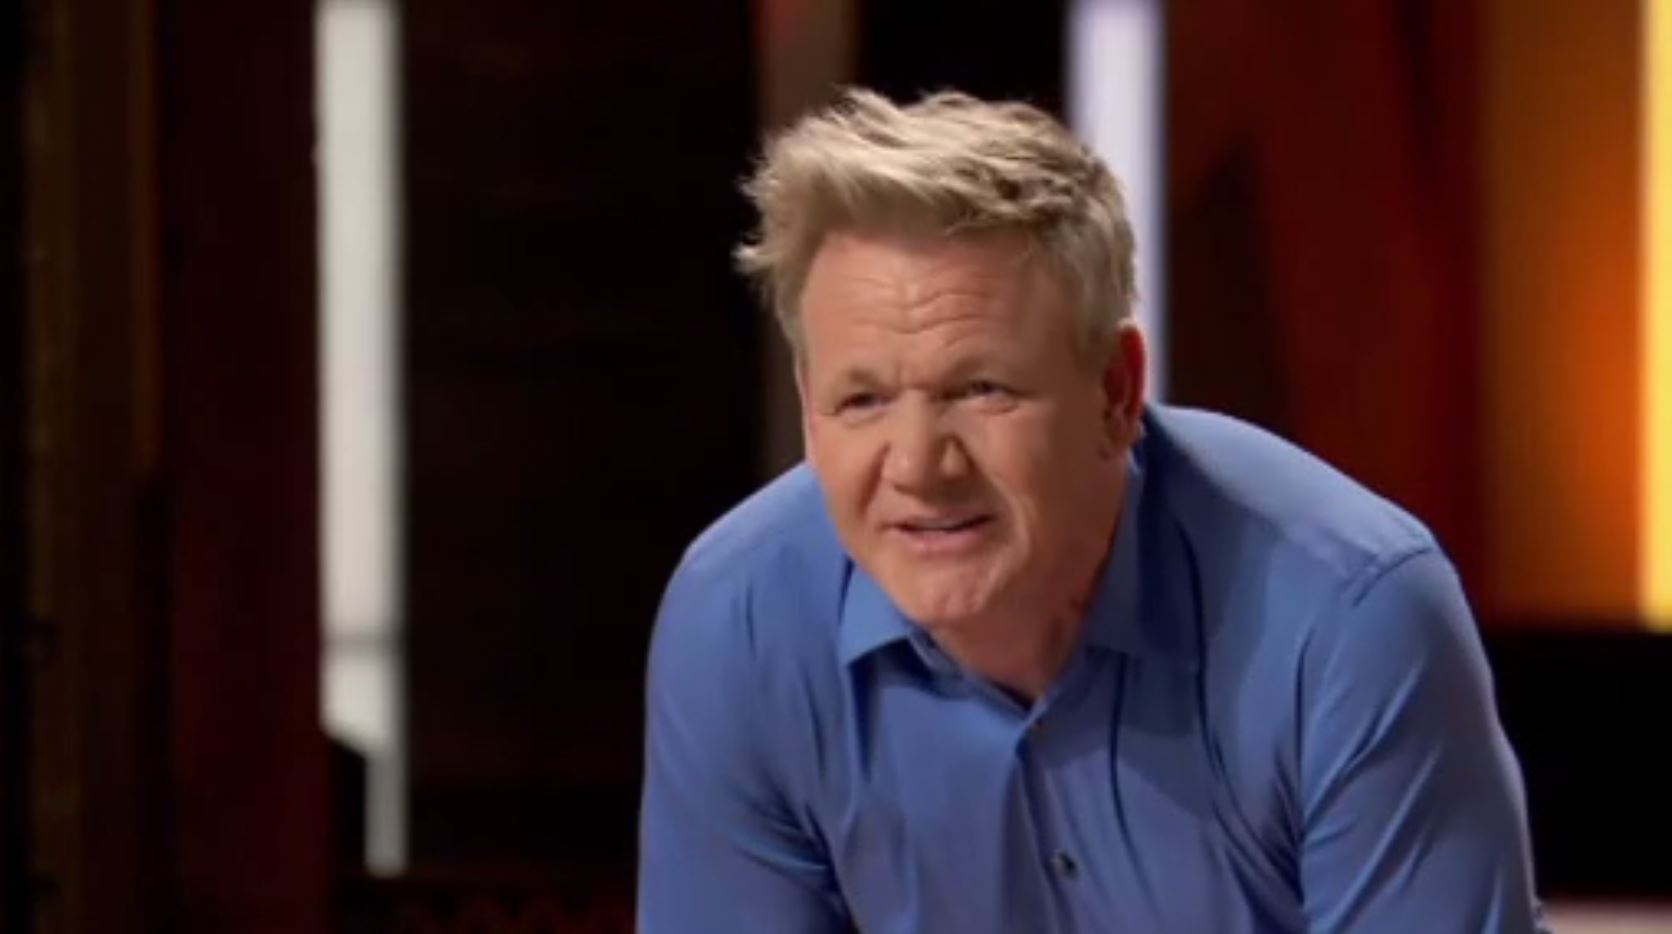 Gordon Ramsay - Latest news, pictures, and video updates - Daily Express US